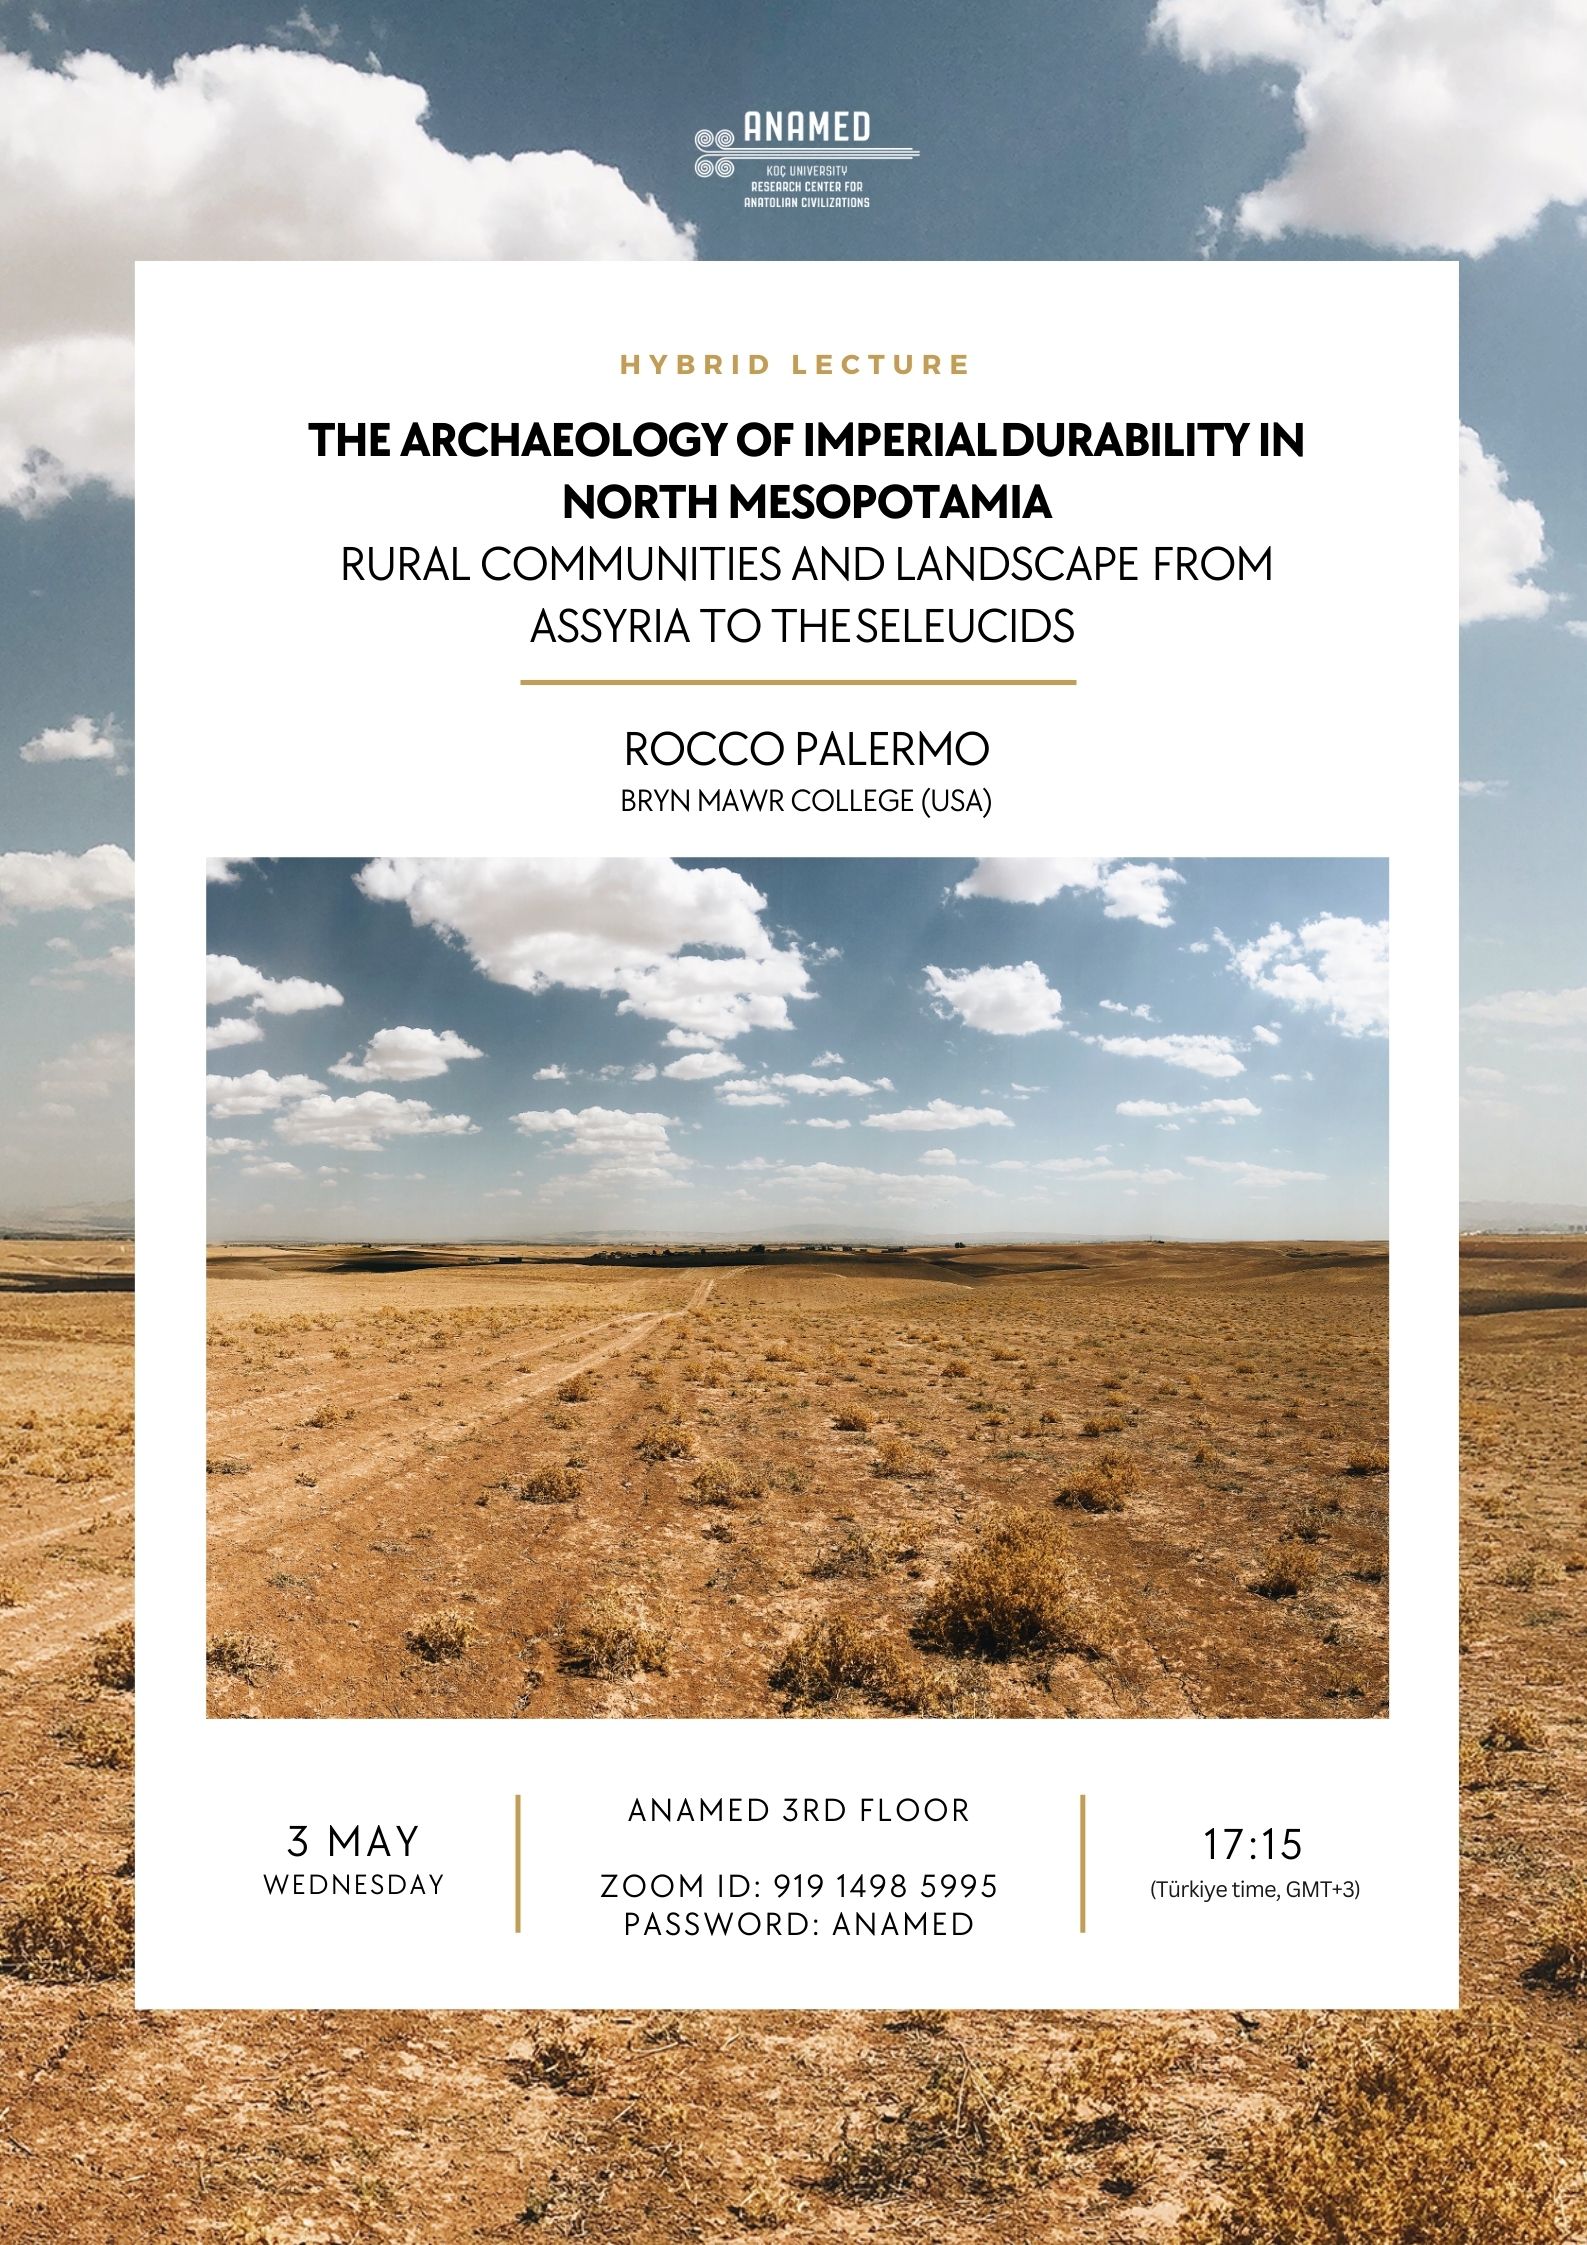 ANAMED Konuşması – The Archaeology of Imperial Durability in North Mesopotamia: Rural Communities and Landscape from Assyria to the Seleucids